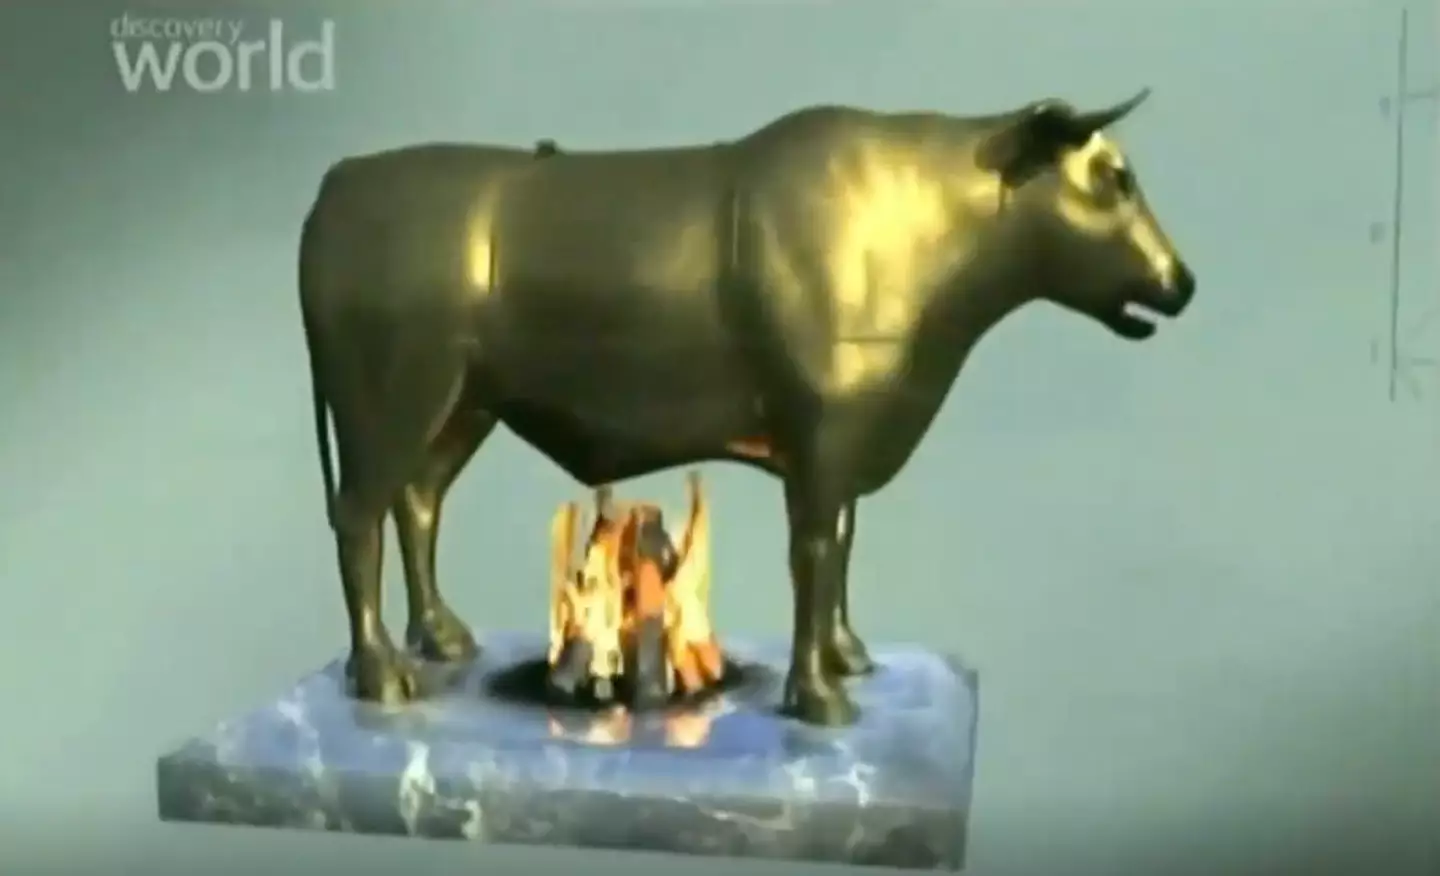 Created in the 6th century BC by a Greek inventor is an evil brazen bull made up of a hollow bronze metal.